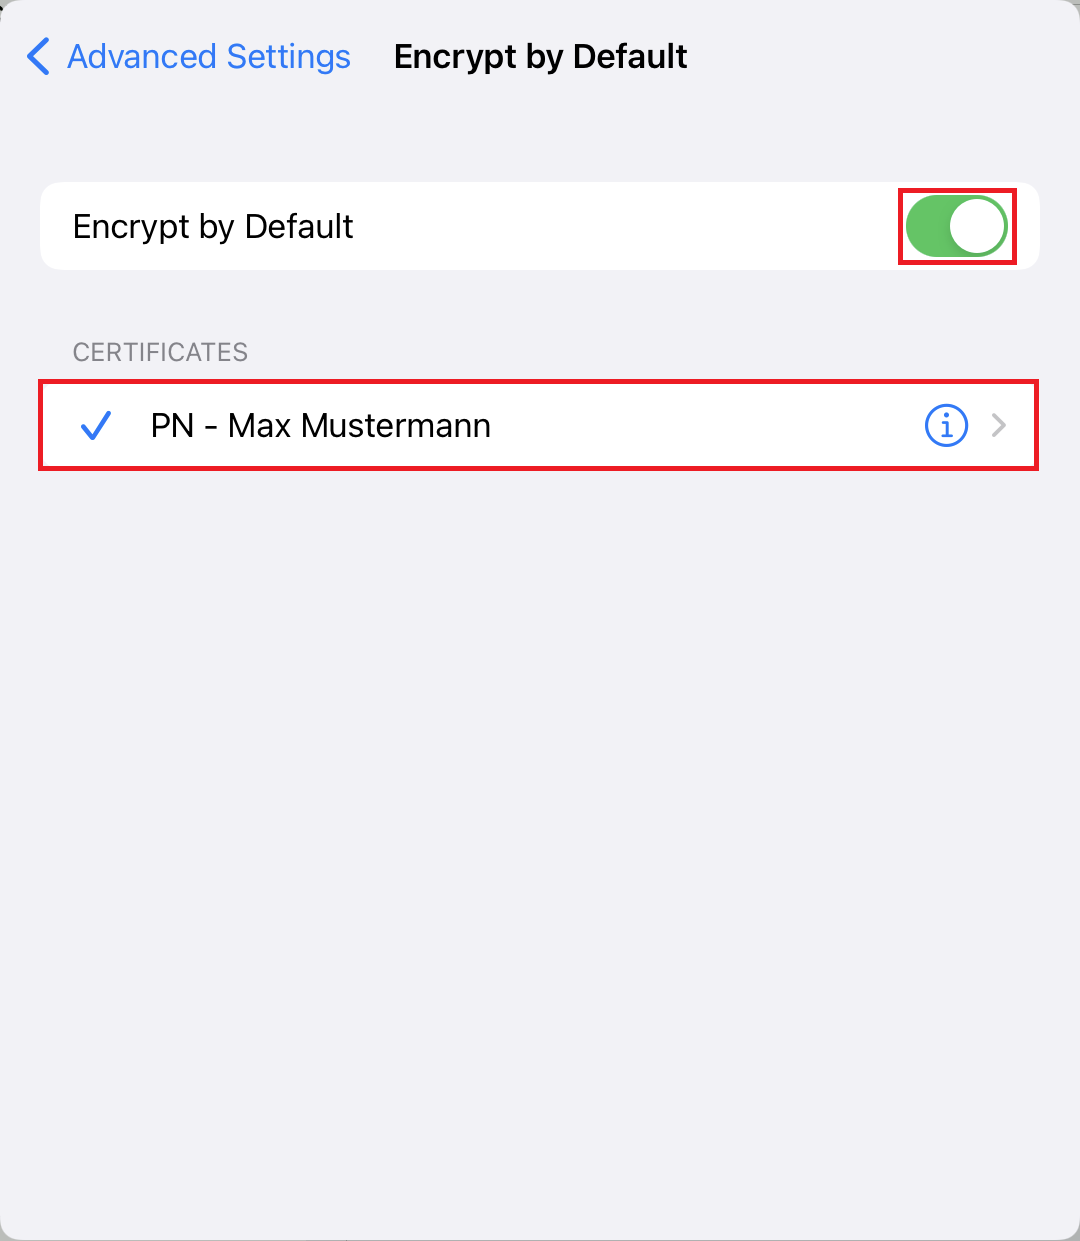 Window Encrypt by Default, left clickable Smaller sign Advanced Settings. Encrypt by default, on the right marked enabled slider. CERTIFICATES. Marked line symbol tick, PN - Max Mustermann, right symbol i in circle, larger than sign.